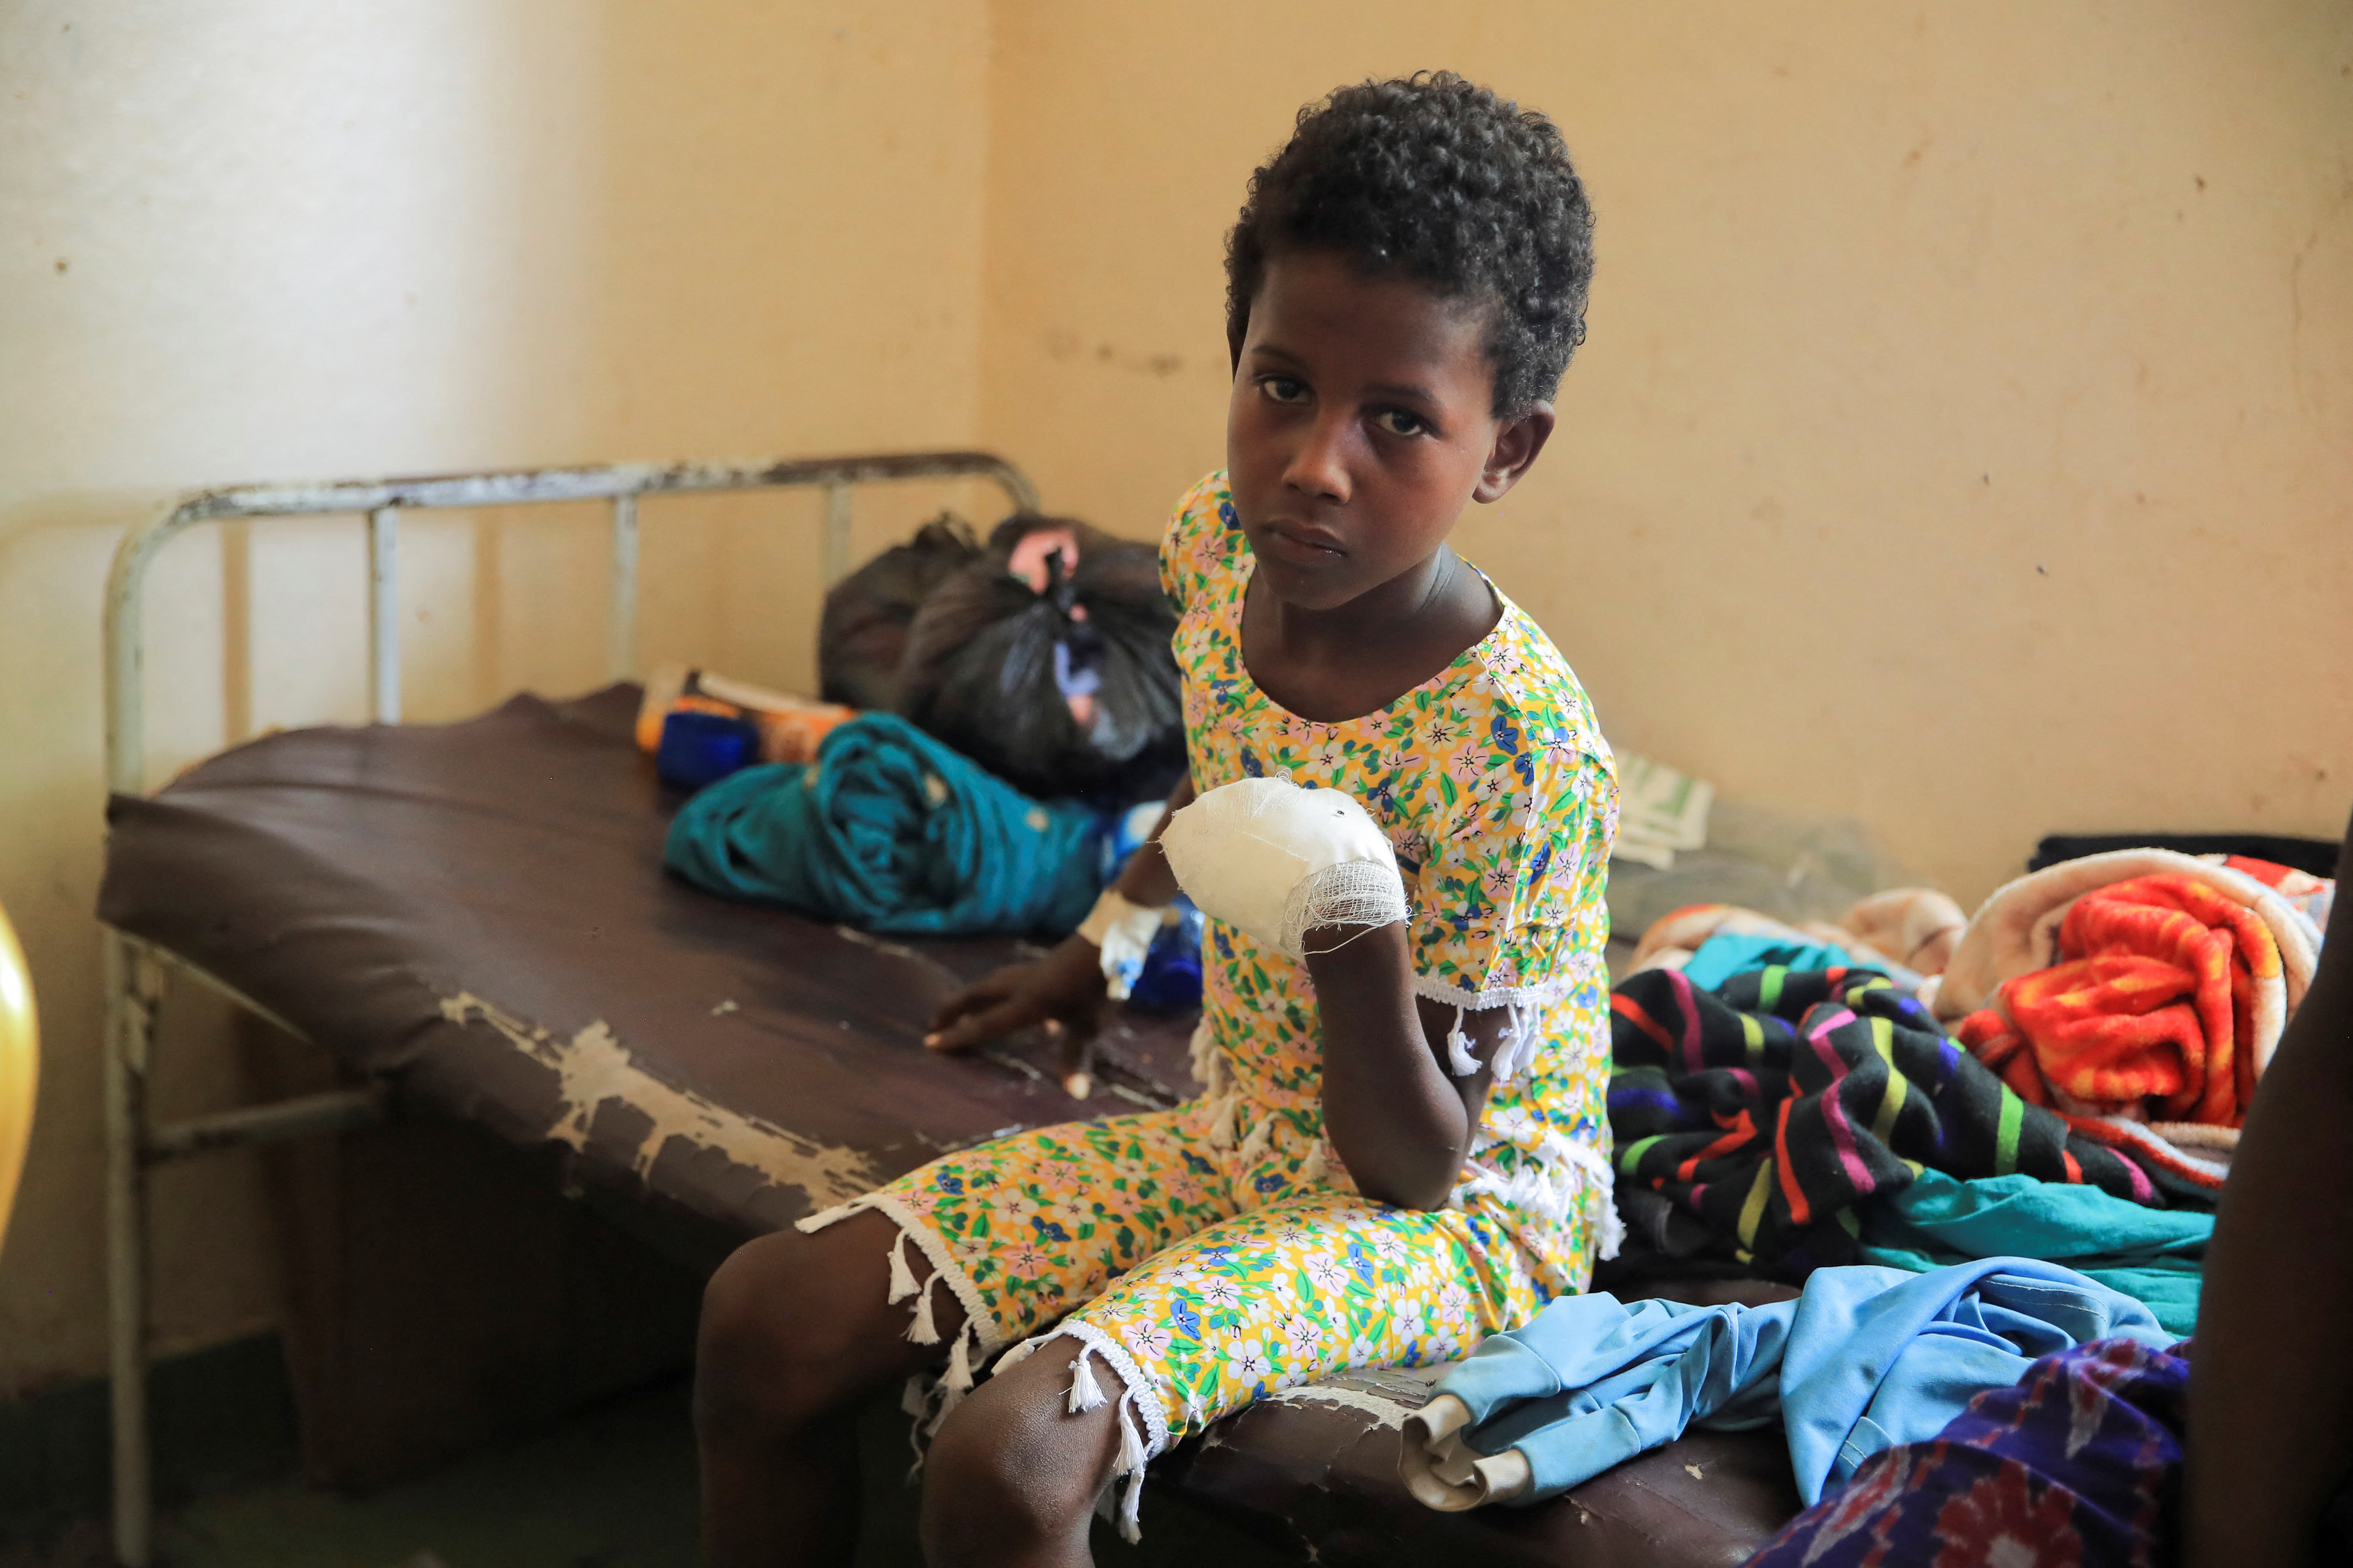 A child who lost his left hand from an explosive receives treatment in Dubti Referral Hospital, in Dubti town